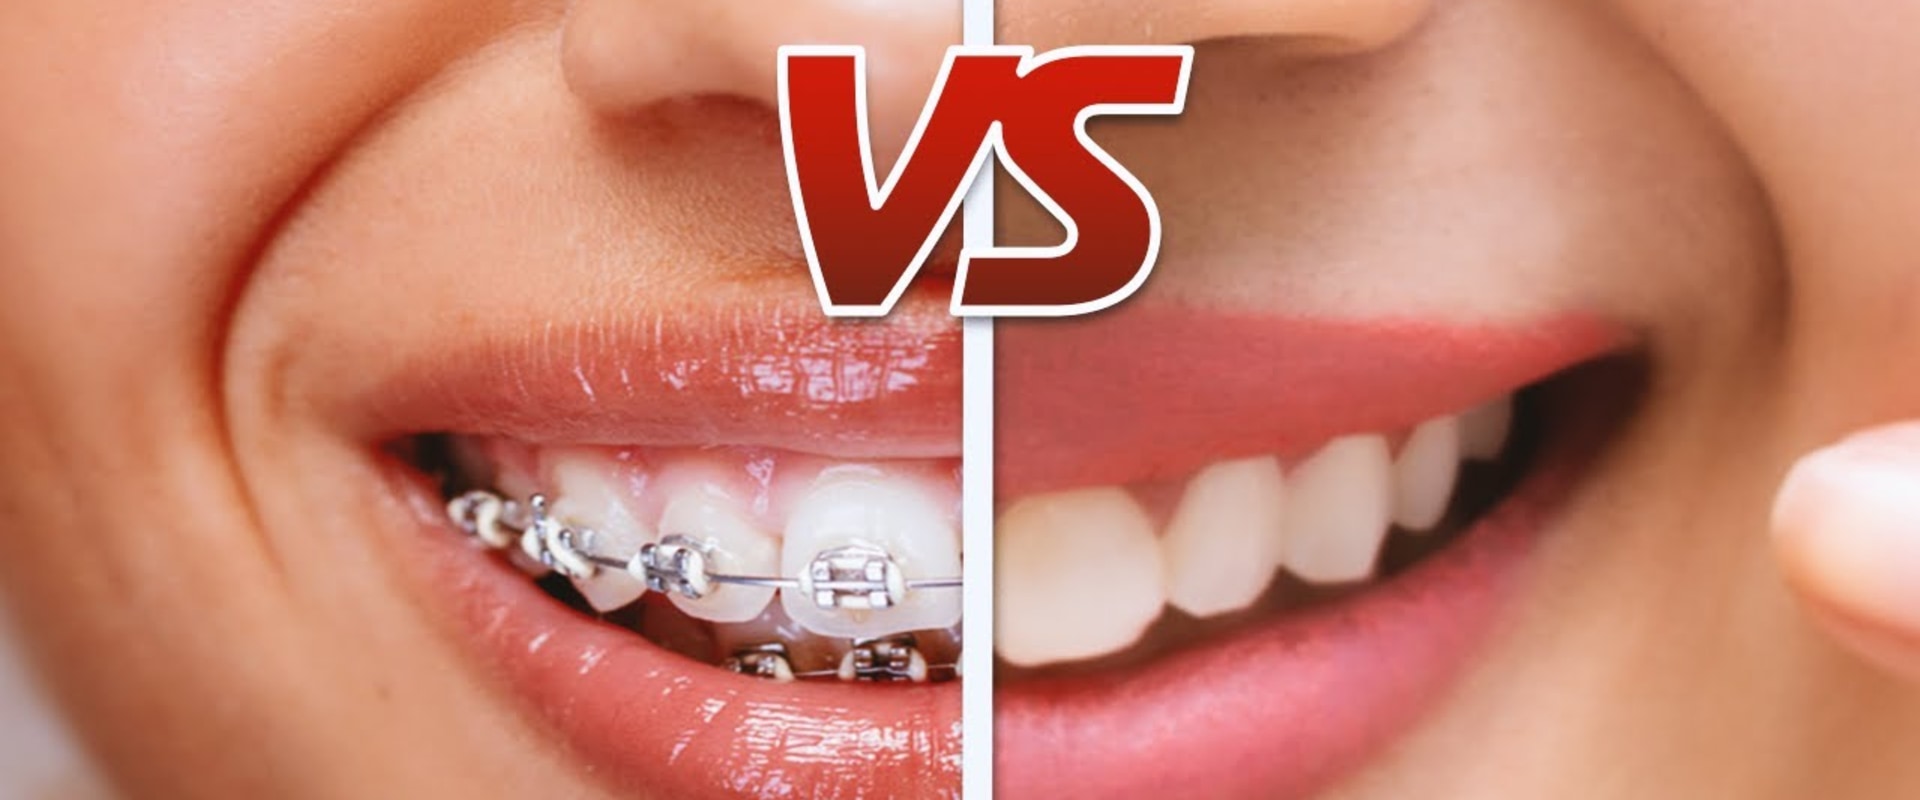 Understanding the Limitations of Invisalign Compared to Braces